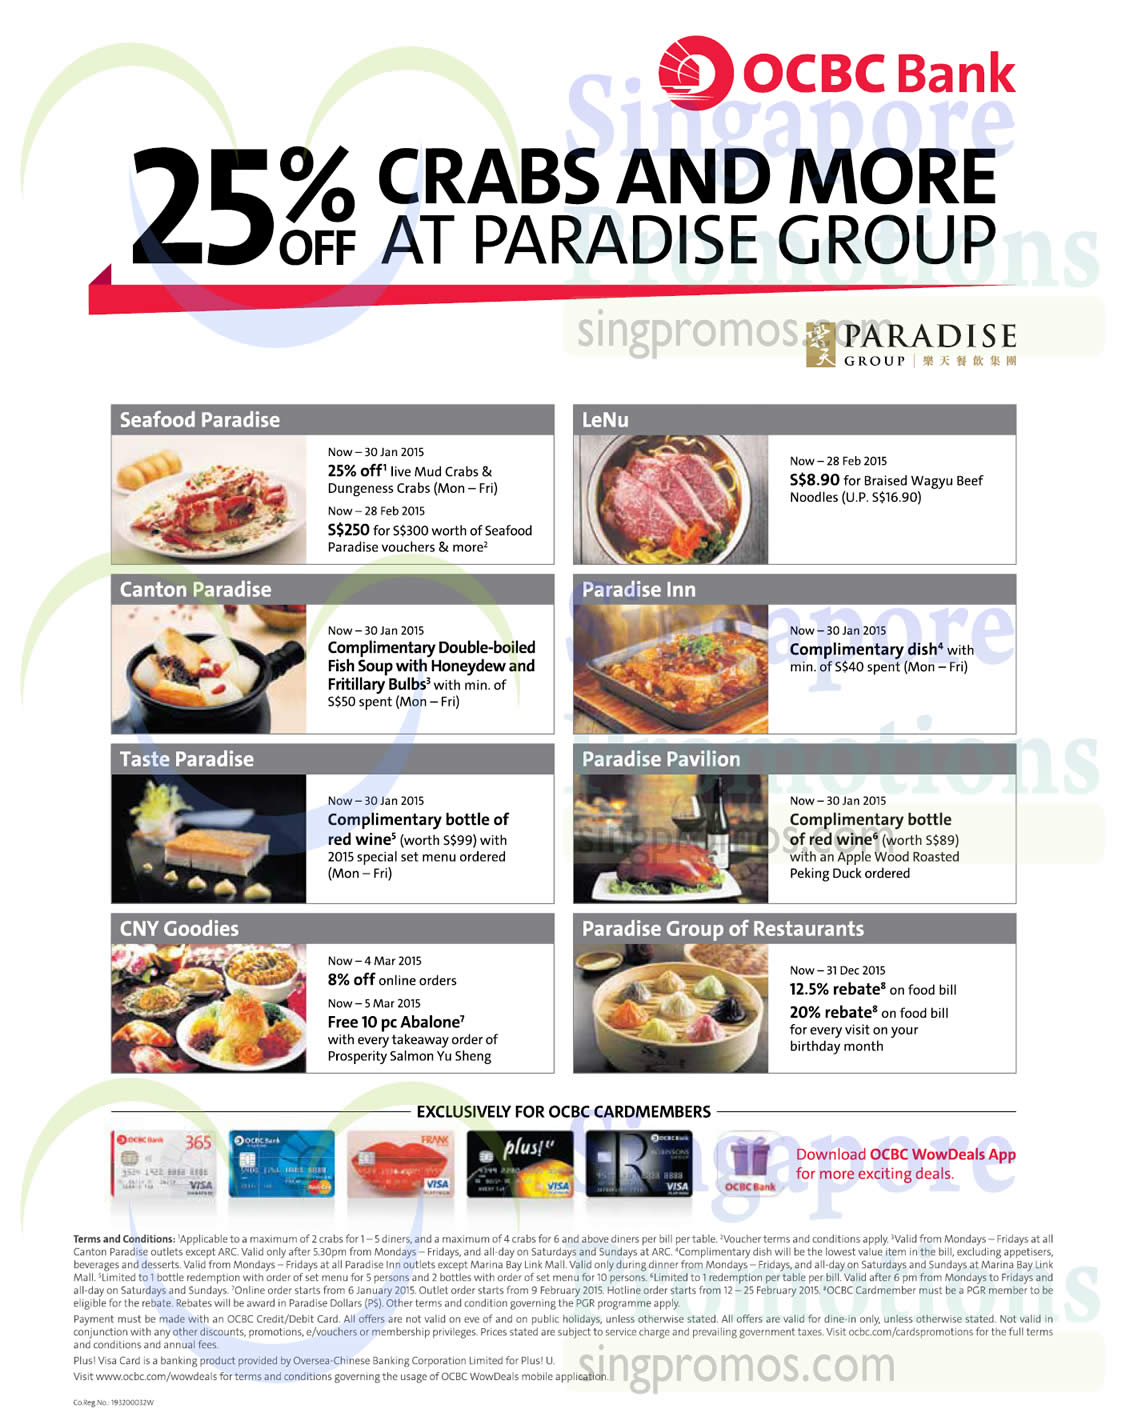 Featured image for Paradise Group 12.5% Rebate For OCBC Cardmembers 13 Jan - 31 Dec 2015